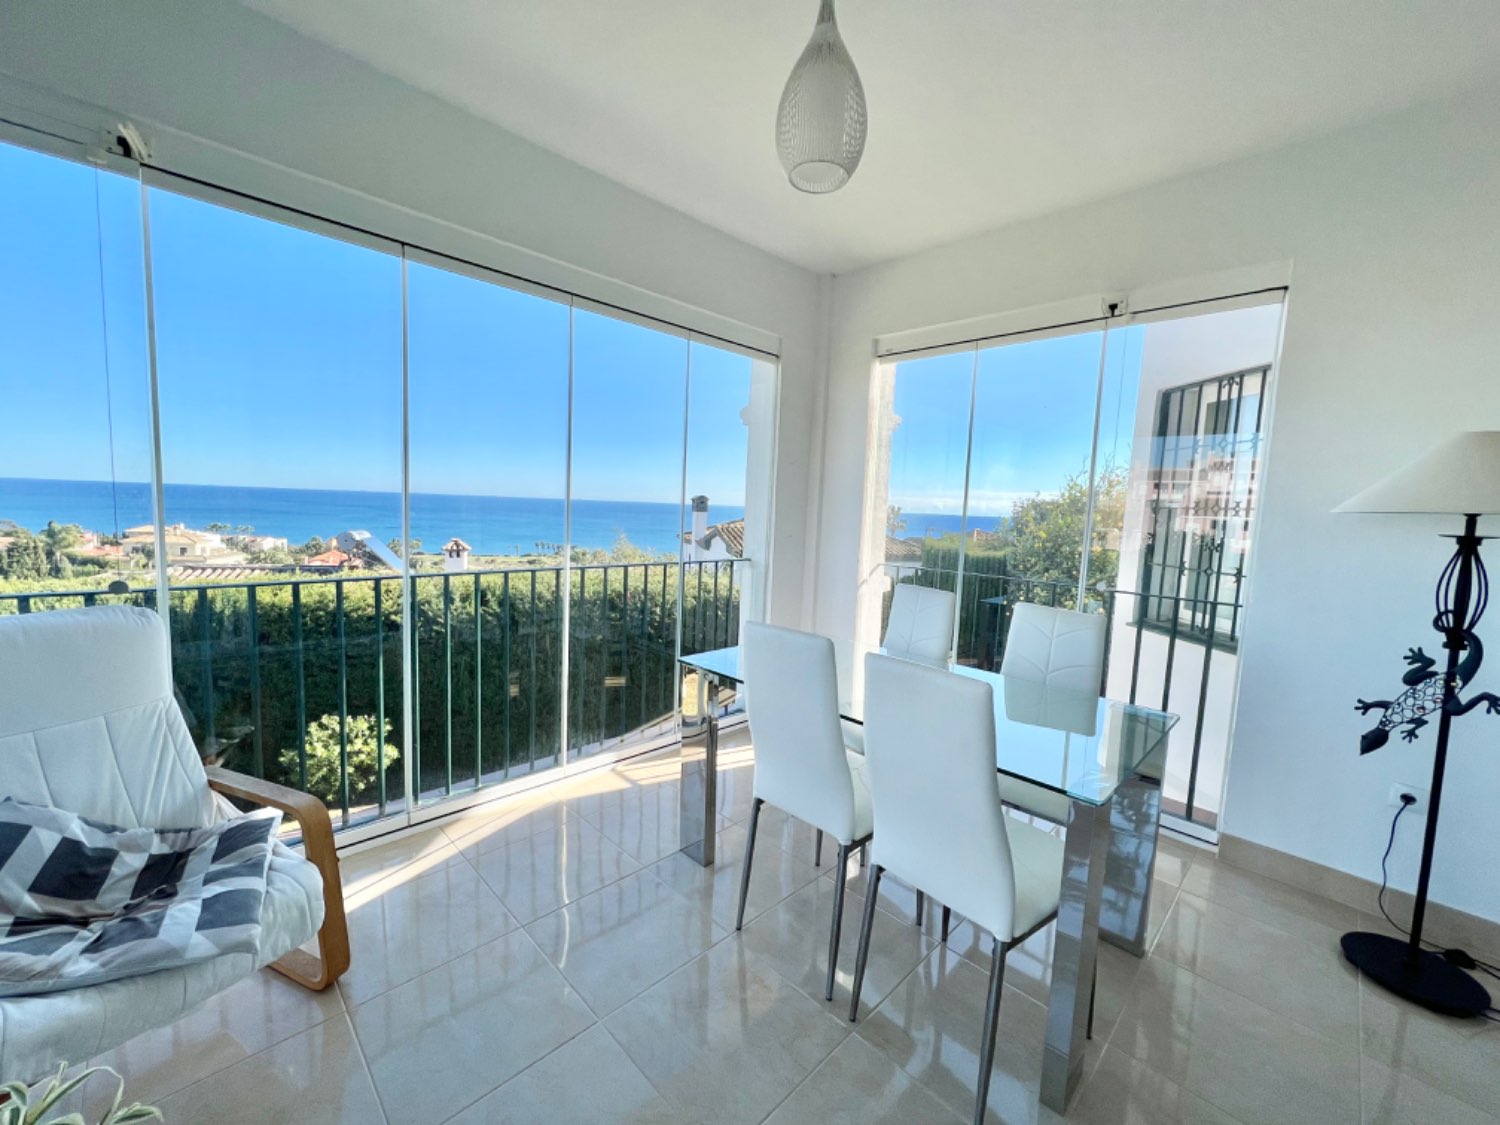 Beautiful four-bedroom house with spectacular sea views in Alcaidesa